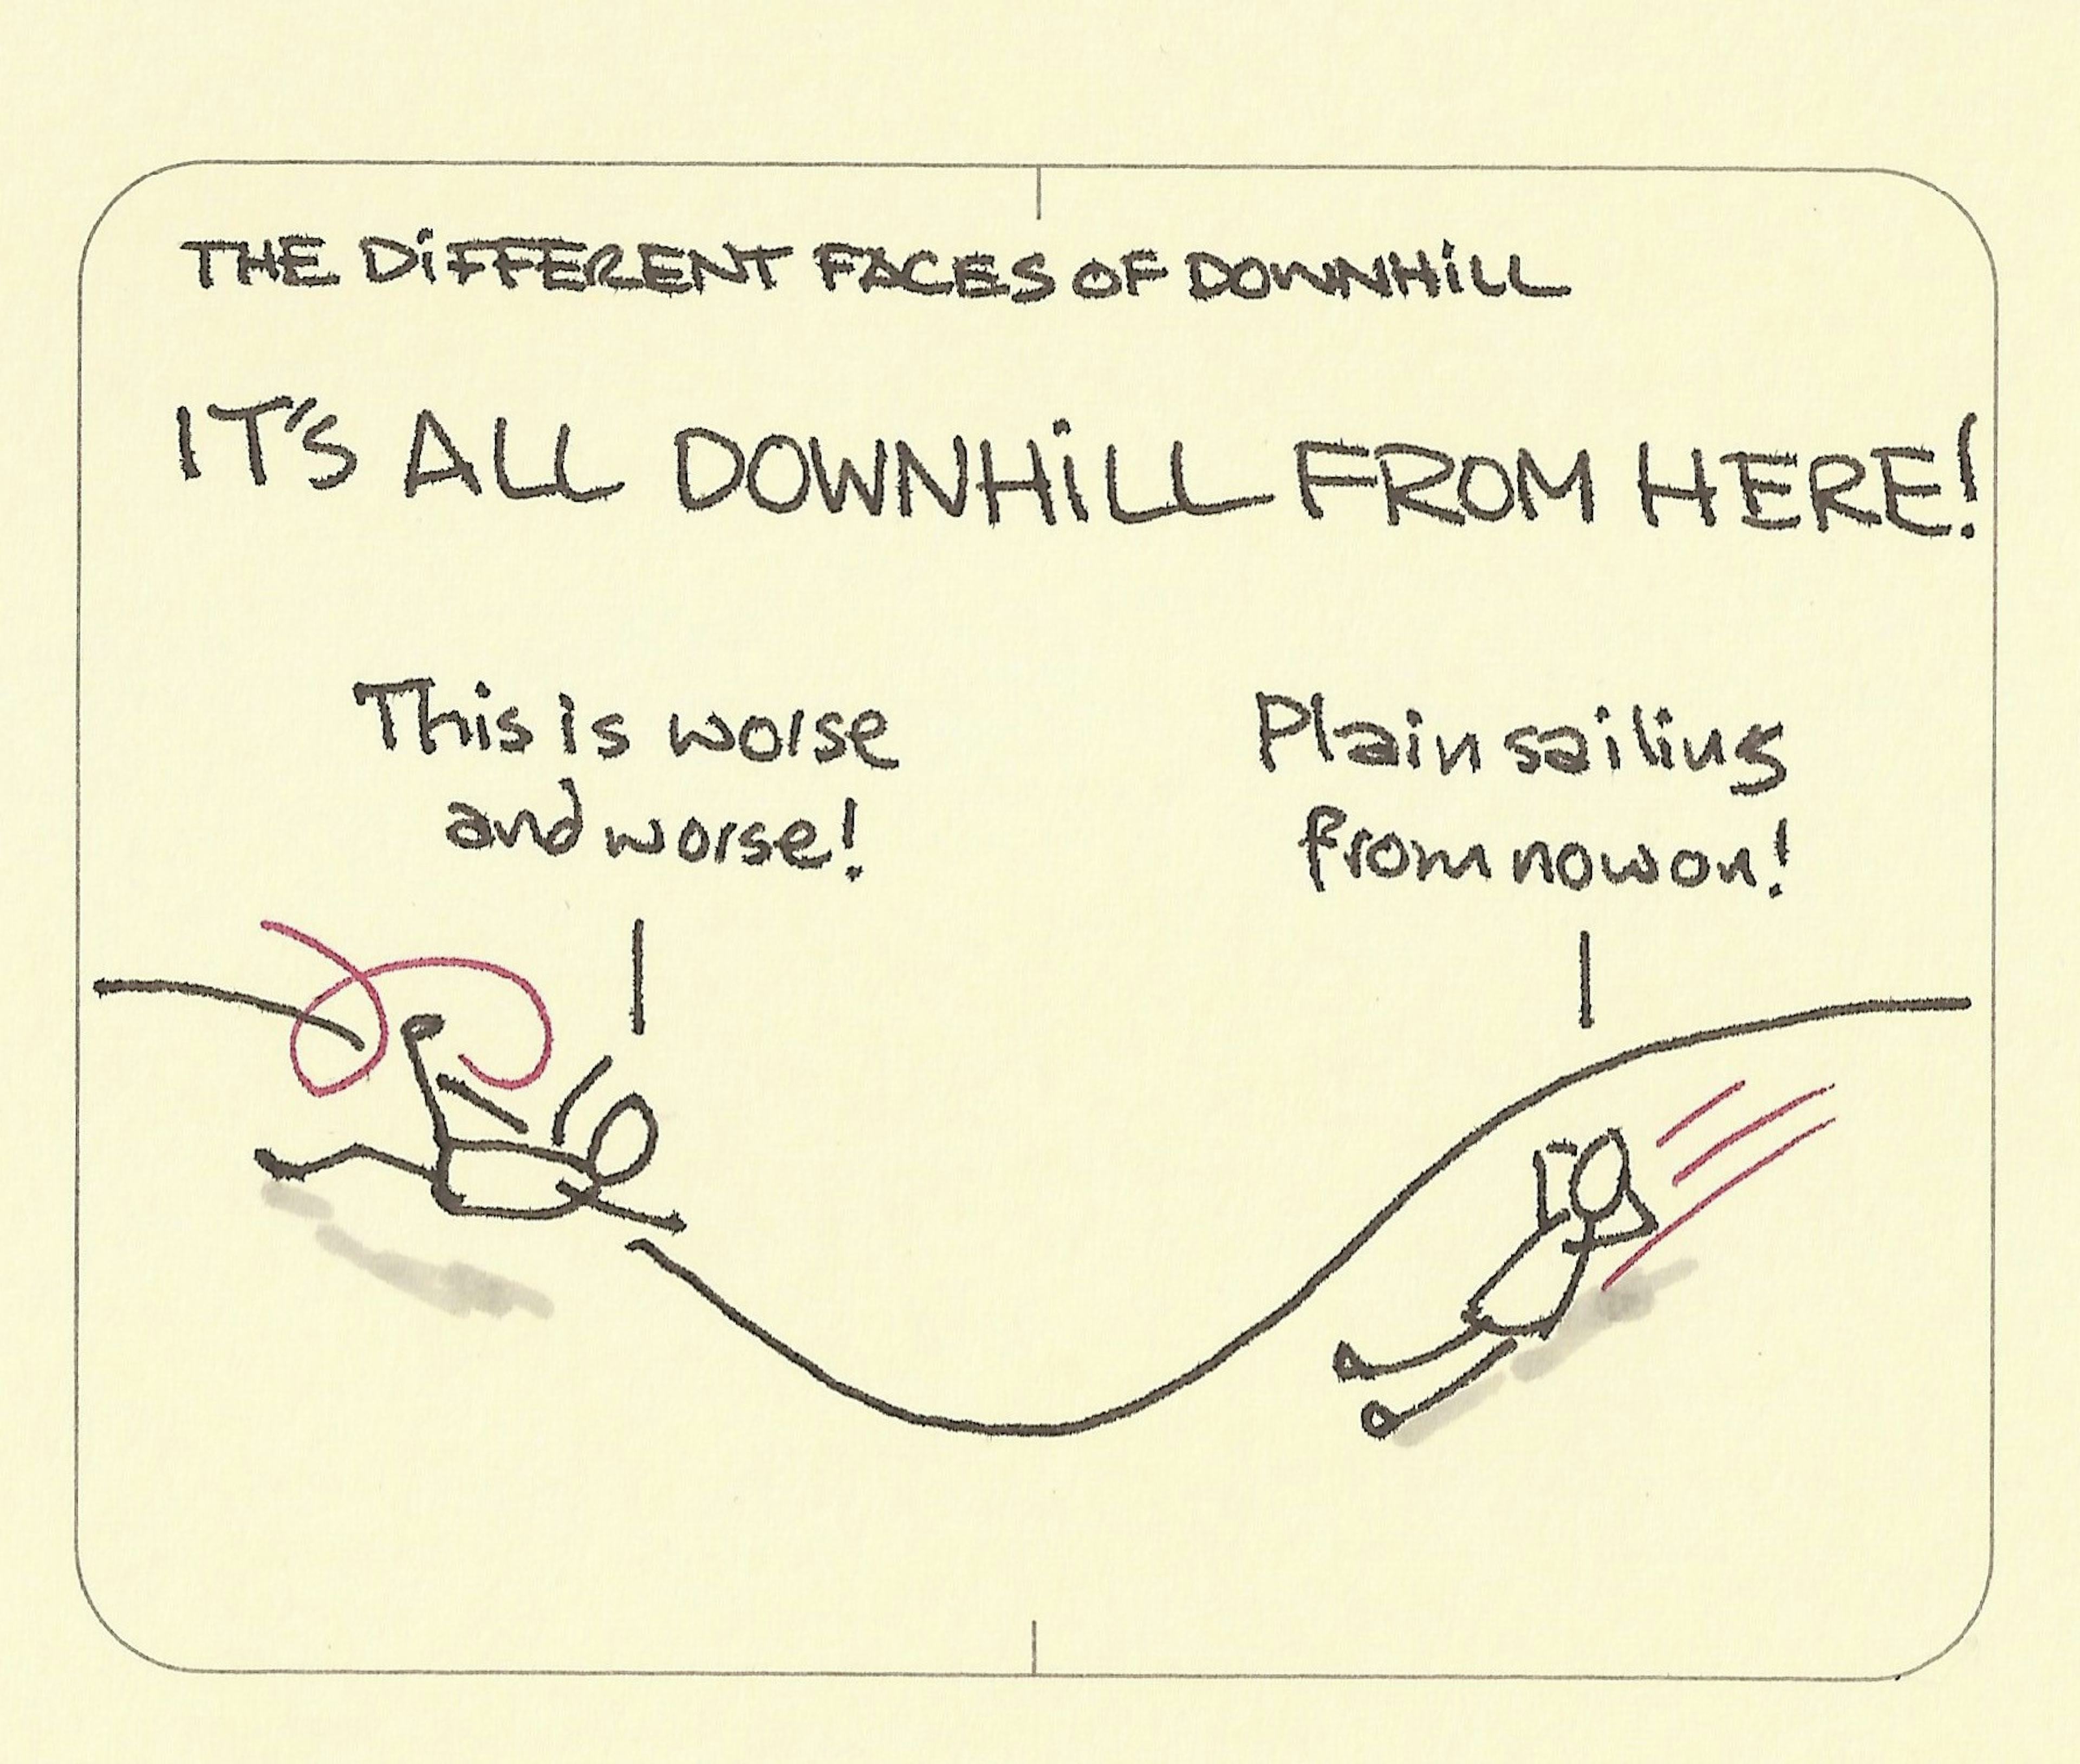 The different faces of downhill - Sketchplanations